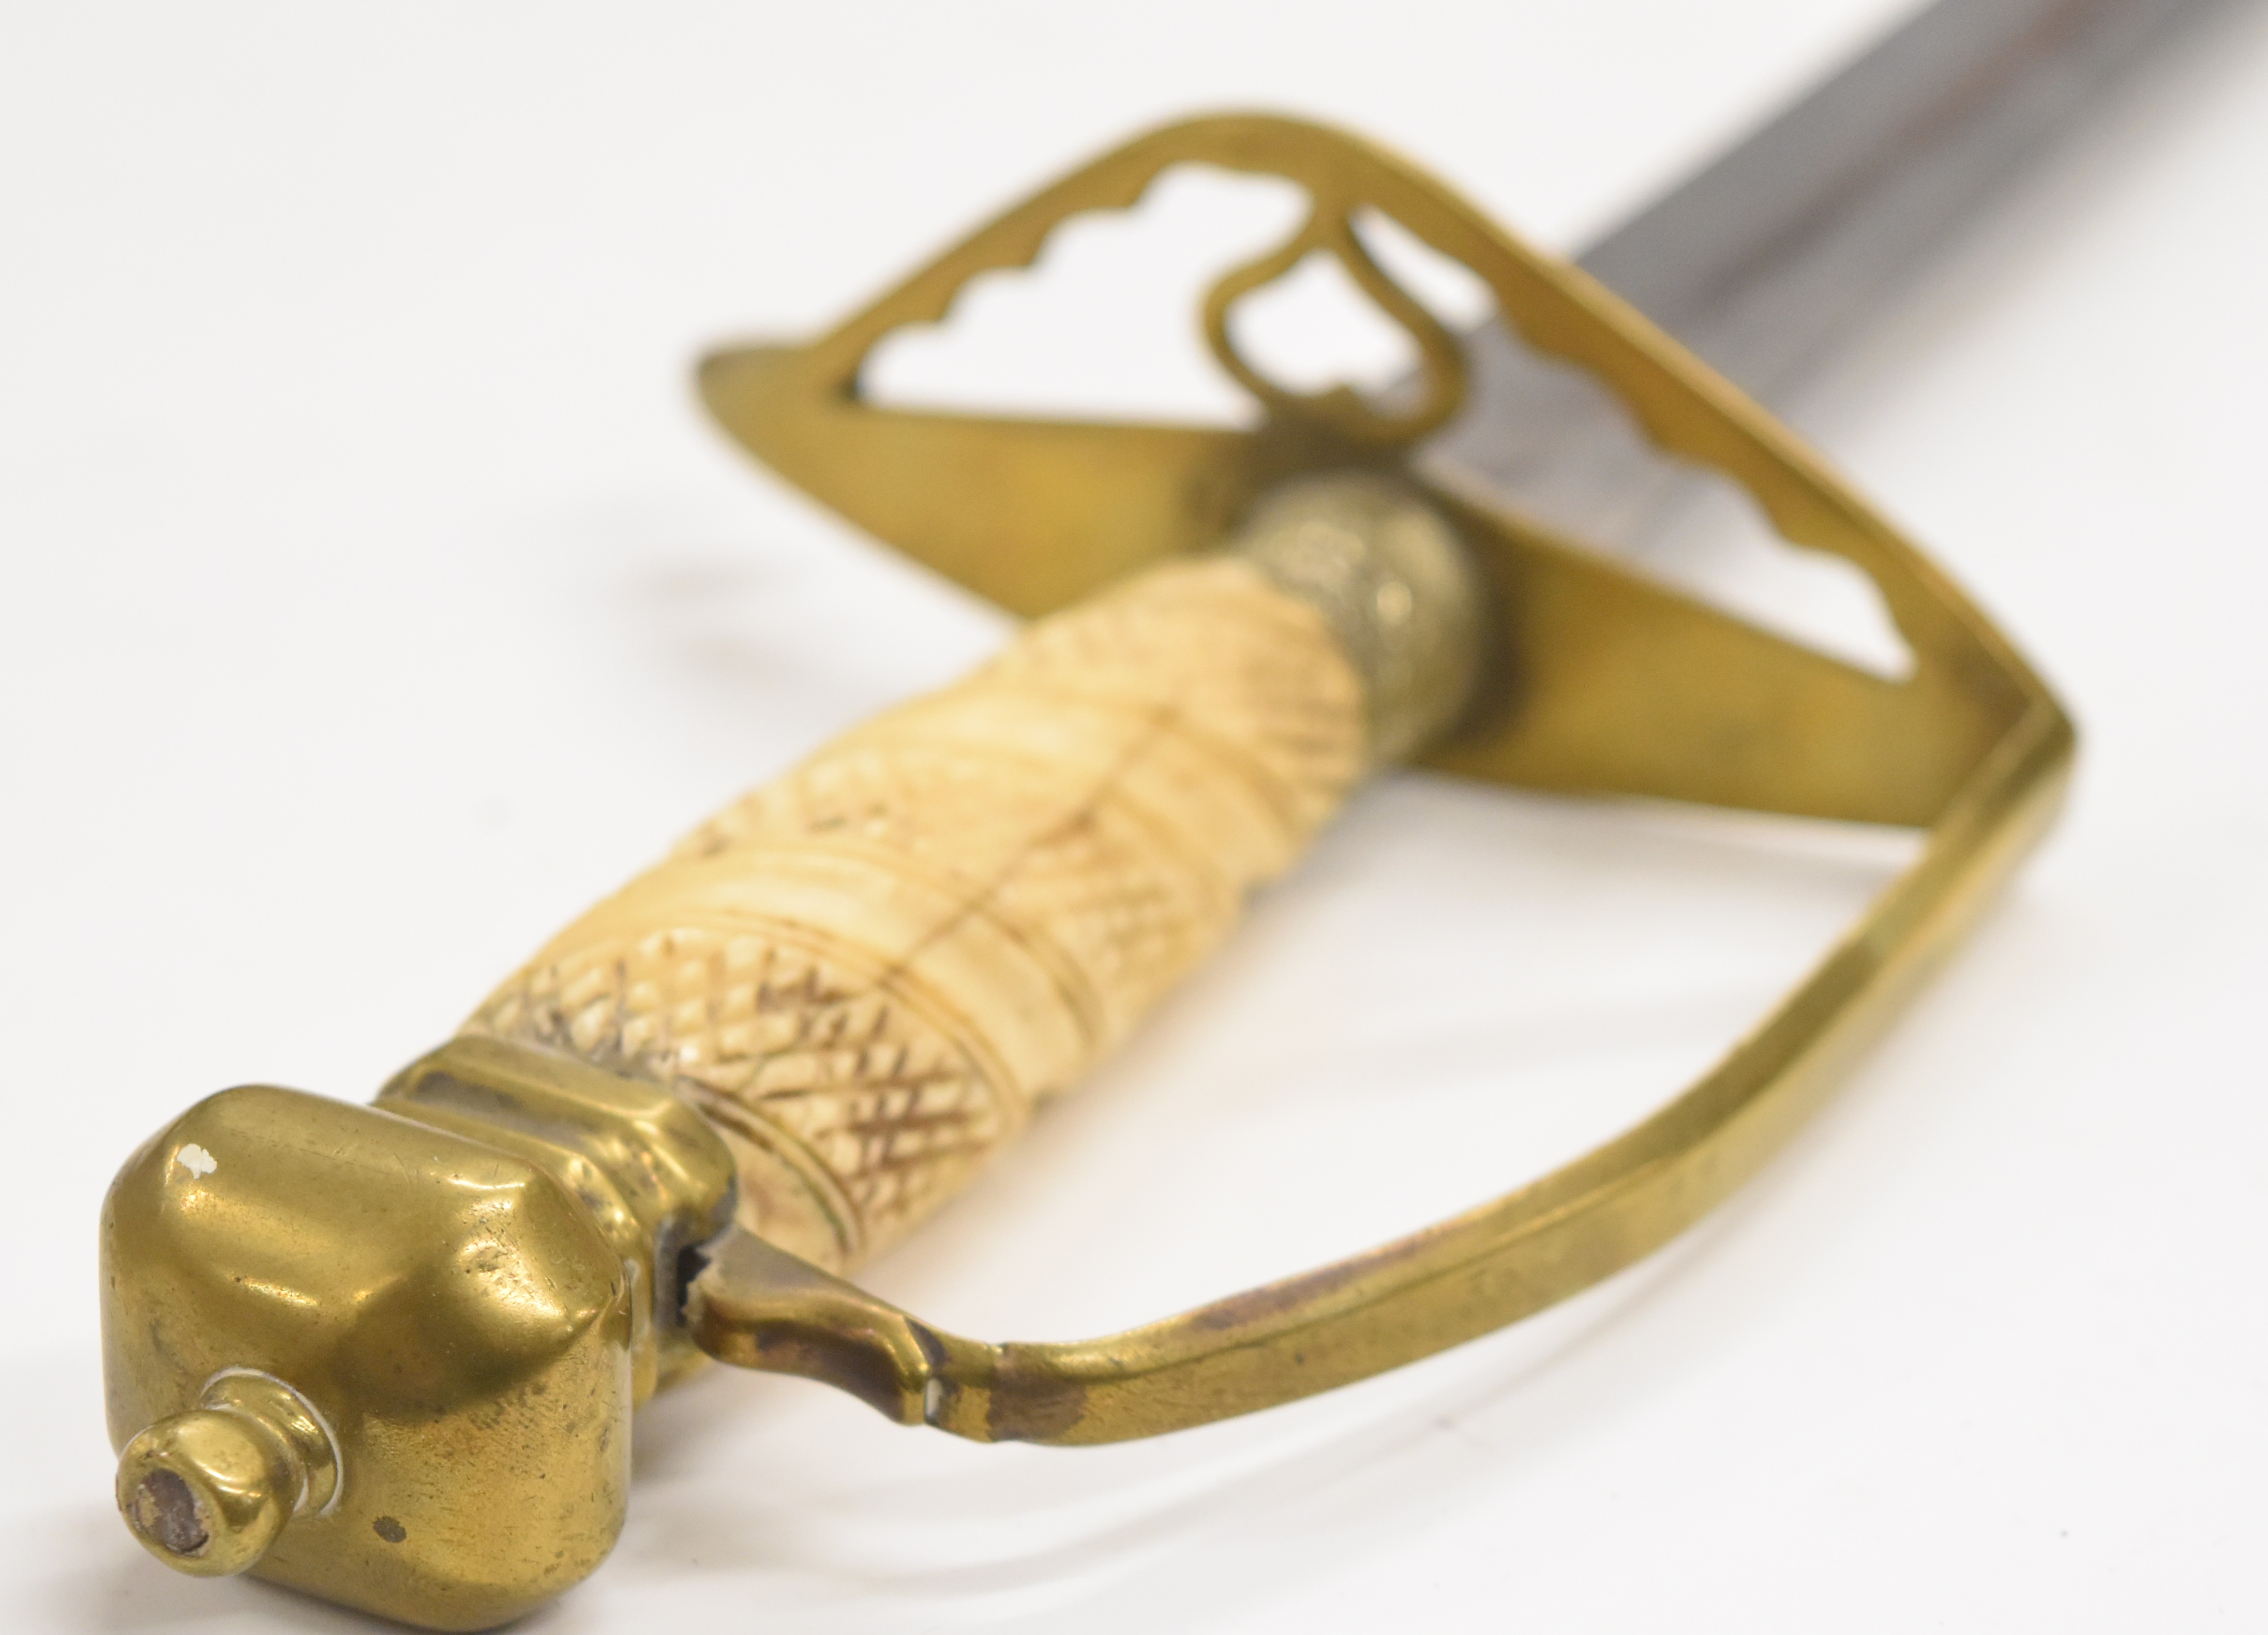 British 1786 pattern Infantry officer's spadroon with bone or similar grip with thistle decoration - Image 12 of 14